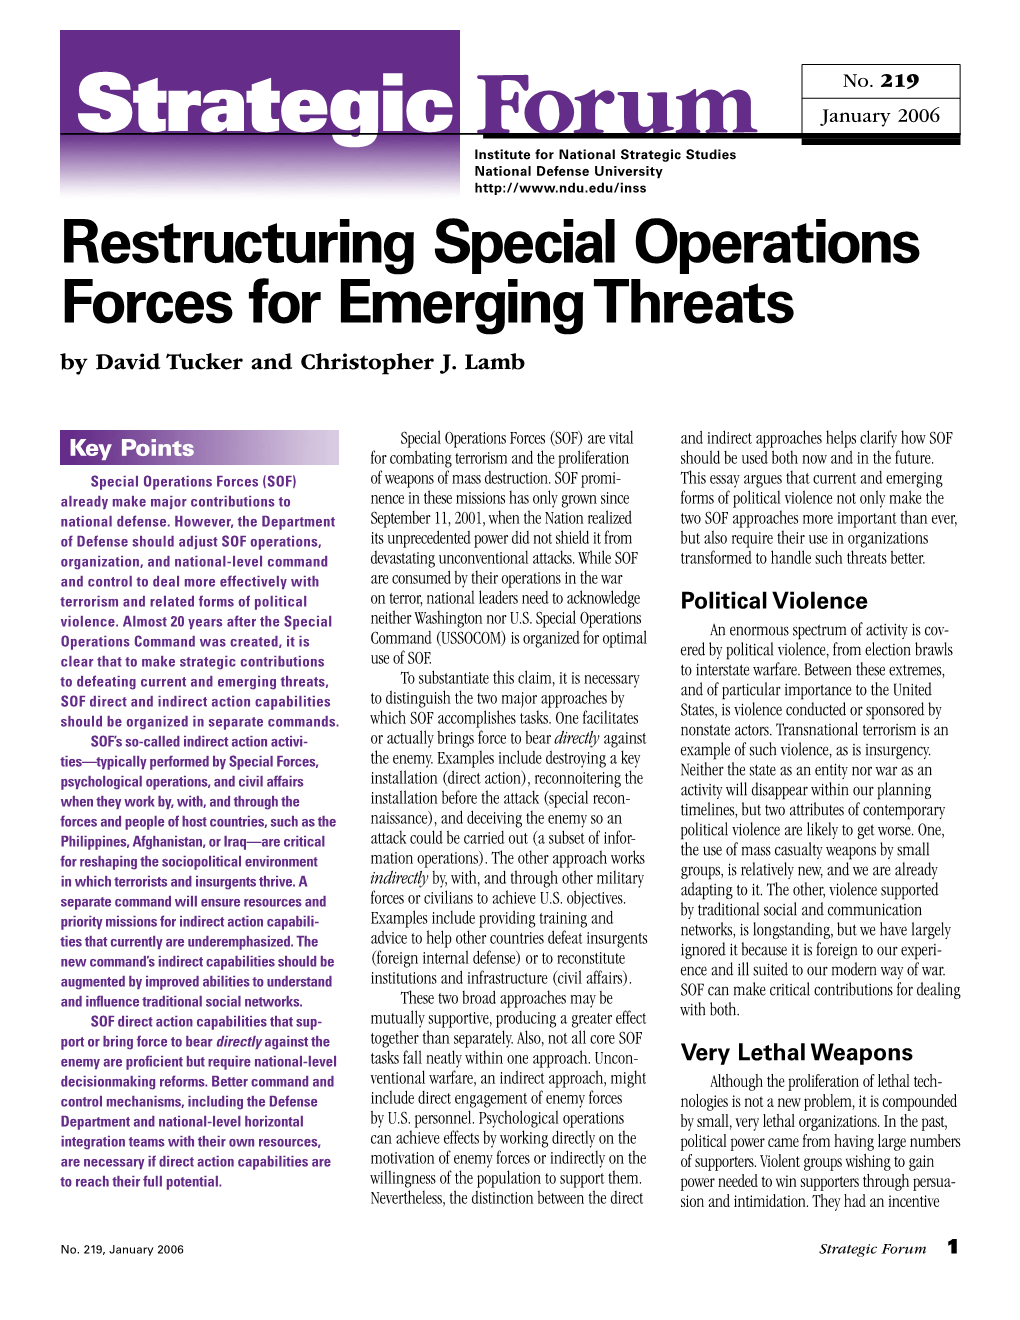 Restructuring Special Operations Forces for Emerging Threats by David Tucker and Christopher J